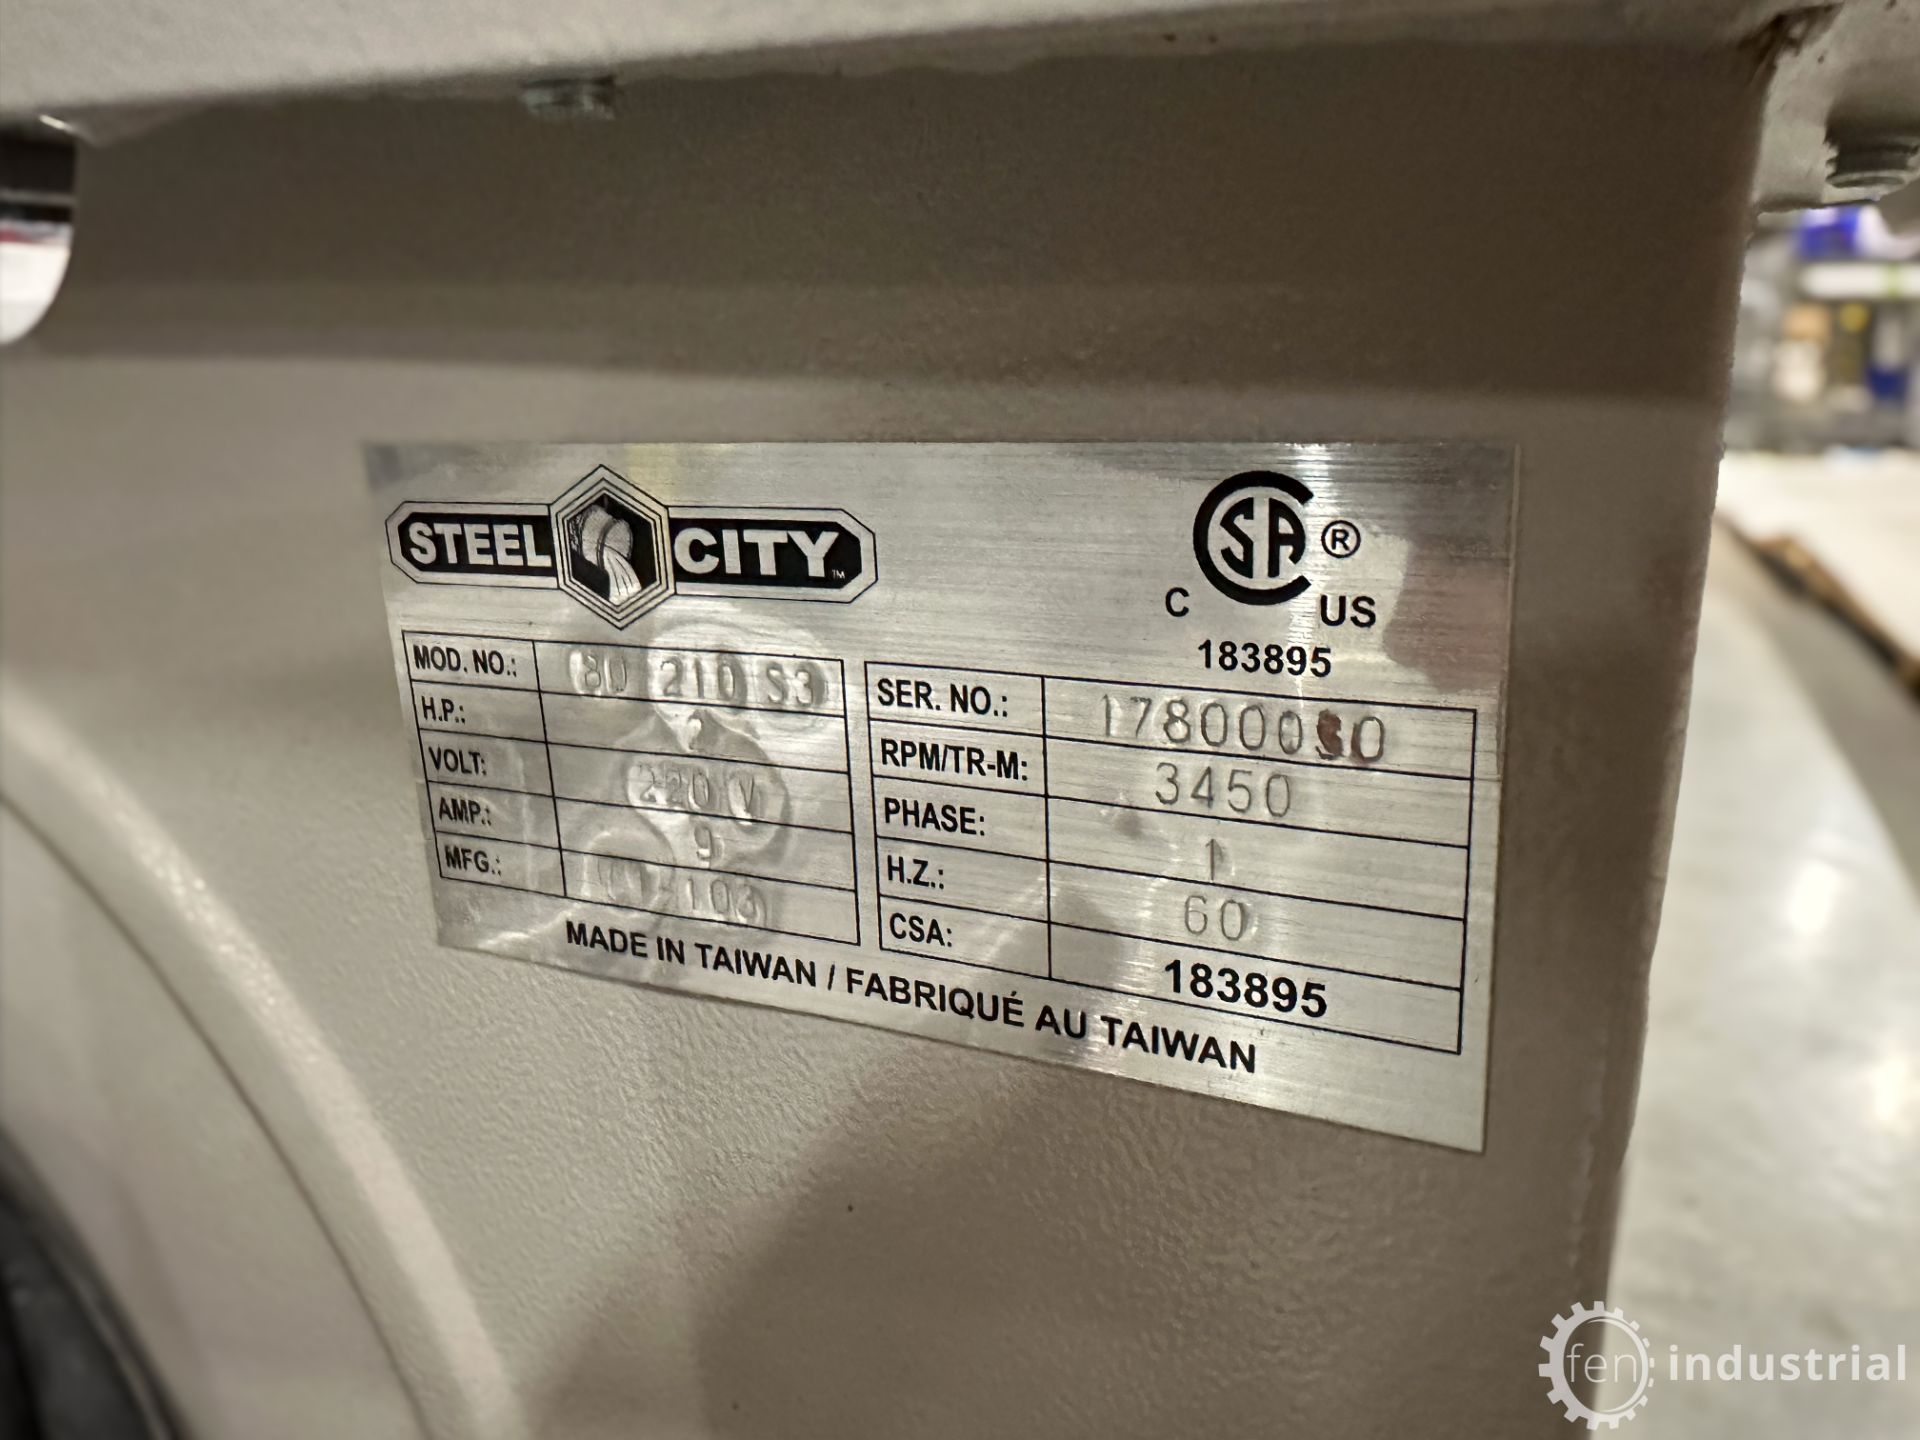 STEEL CITY 80-210 S3 DUST COLLECTOR, 2HP, 3,450 RPM, MFG: CT-103, 220V, S/N’S 17800030 (RIGGING - Image 20 of 25